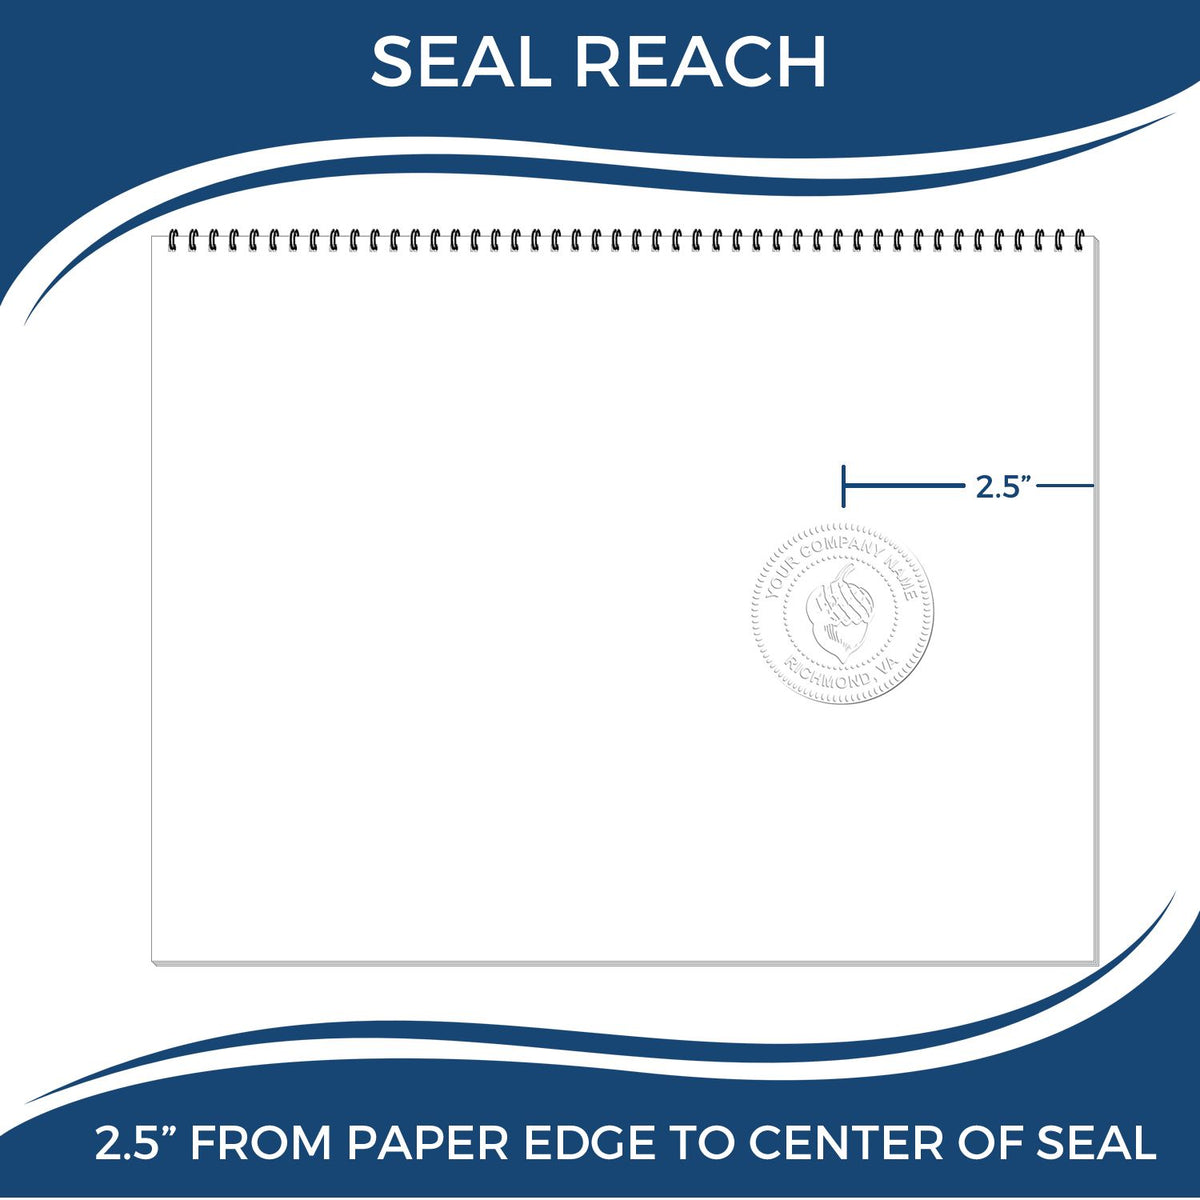 An infographic showing the seal reach which is represented by a ruler and a miniature seal image of the Heavy Duty Cast Iron Vermont Architect Embosser